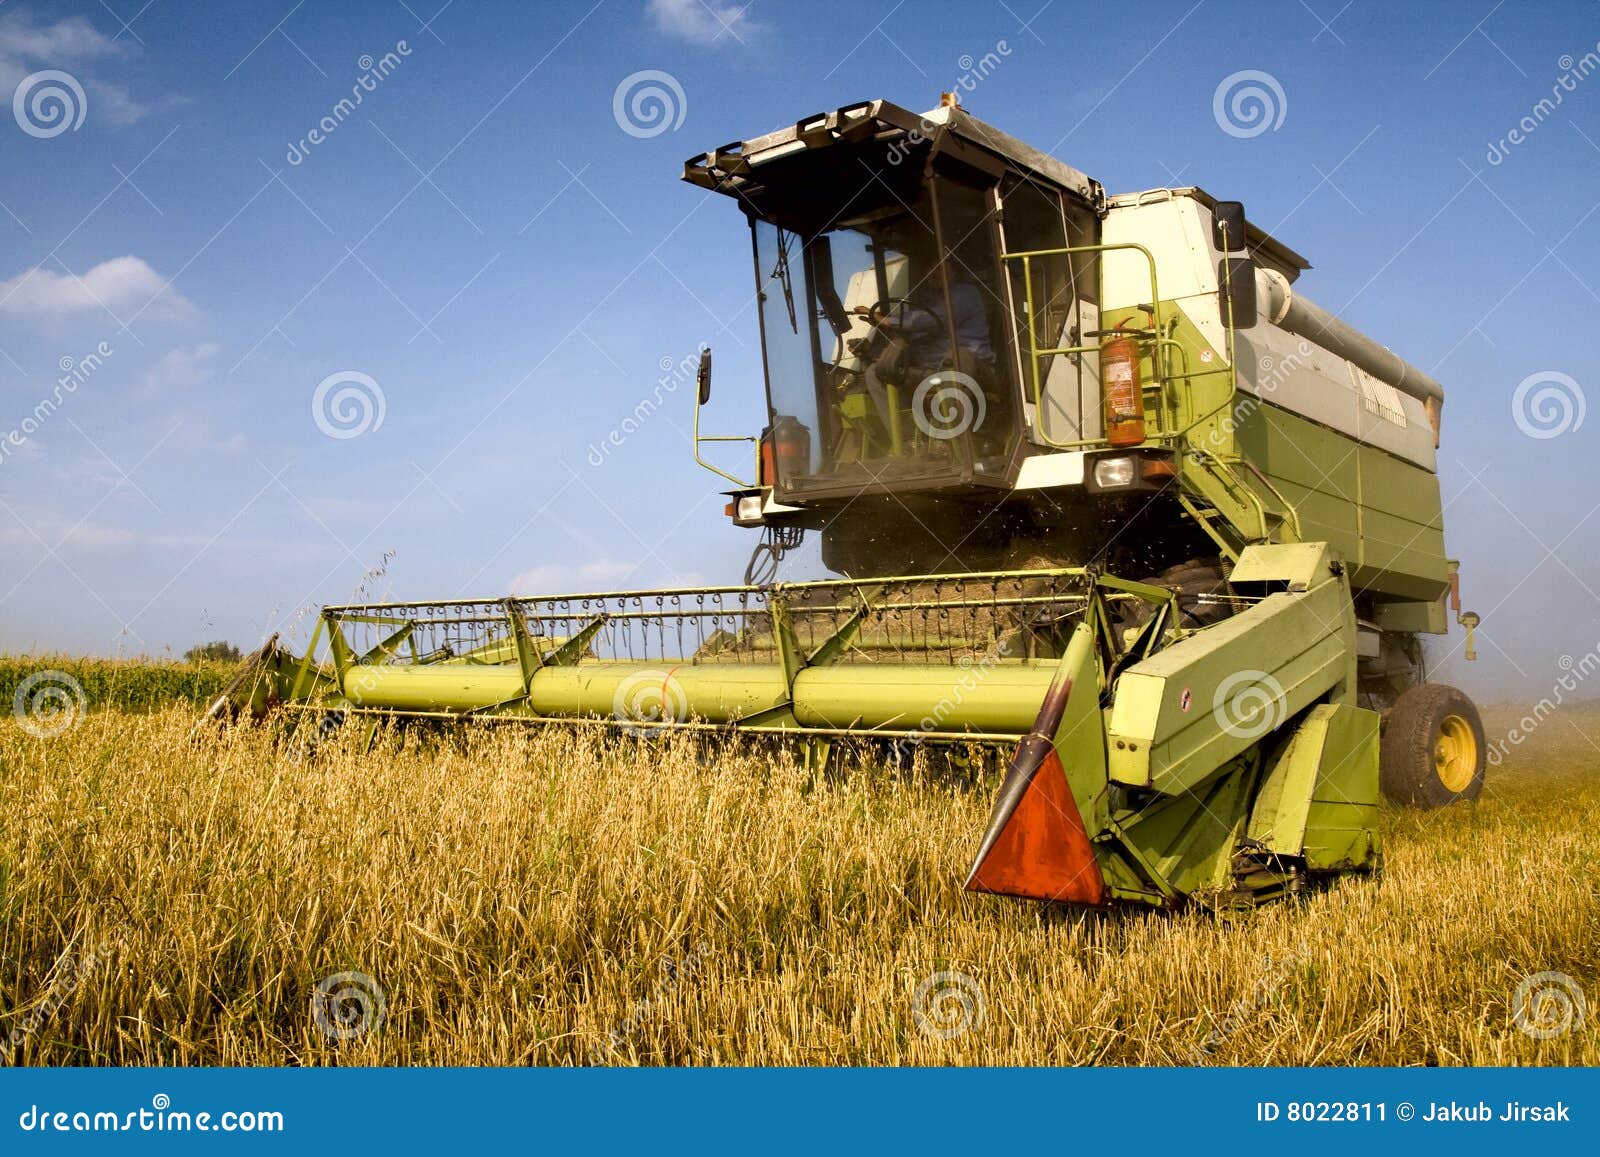 agriculture - combine